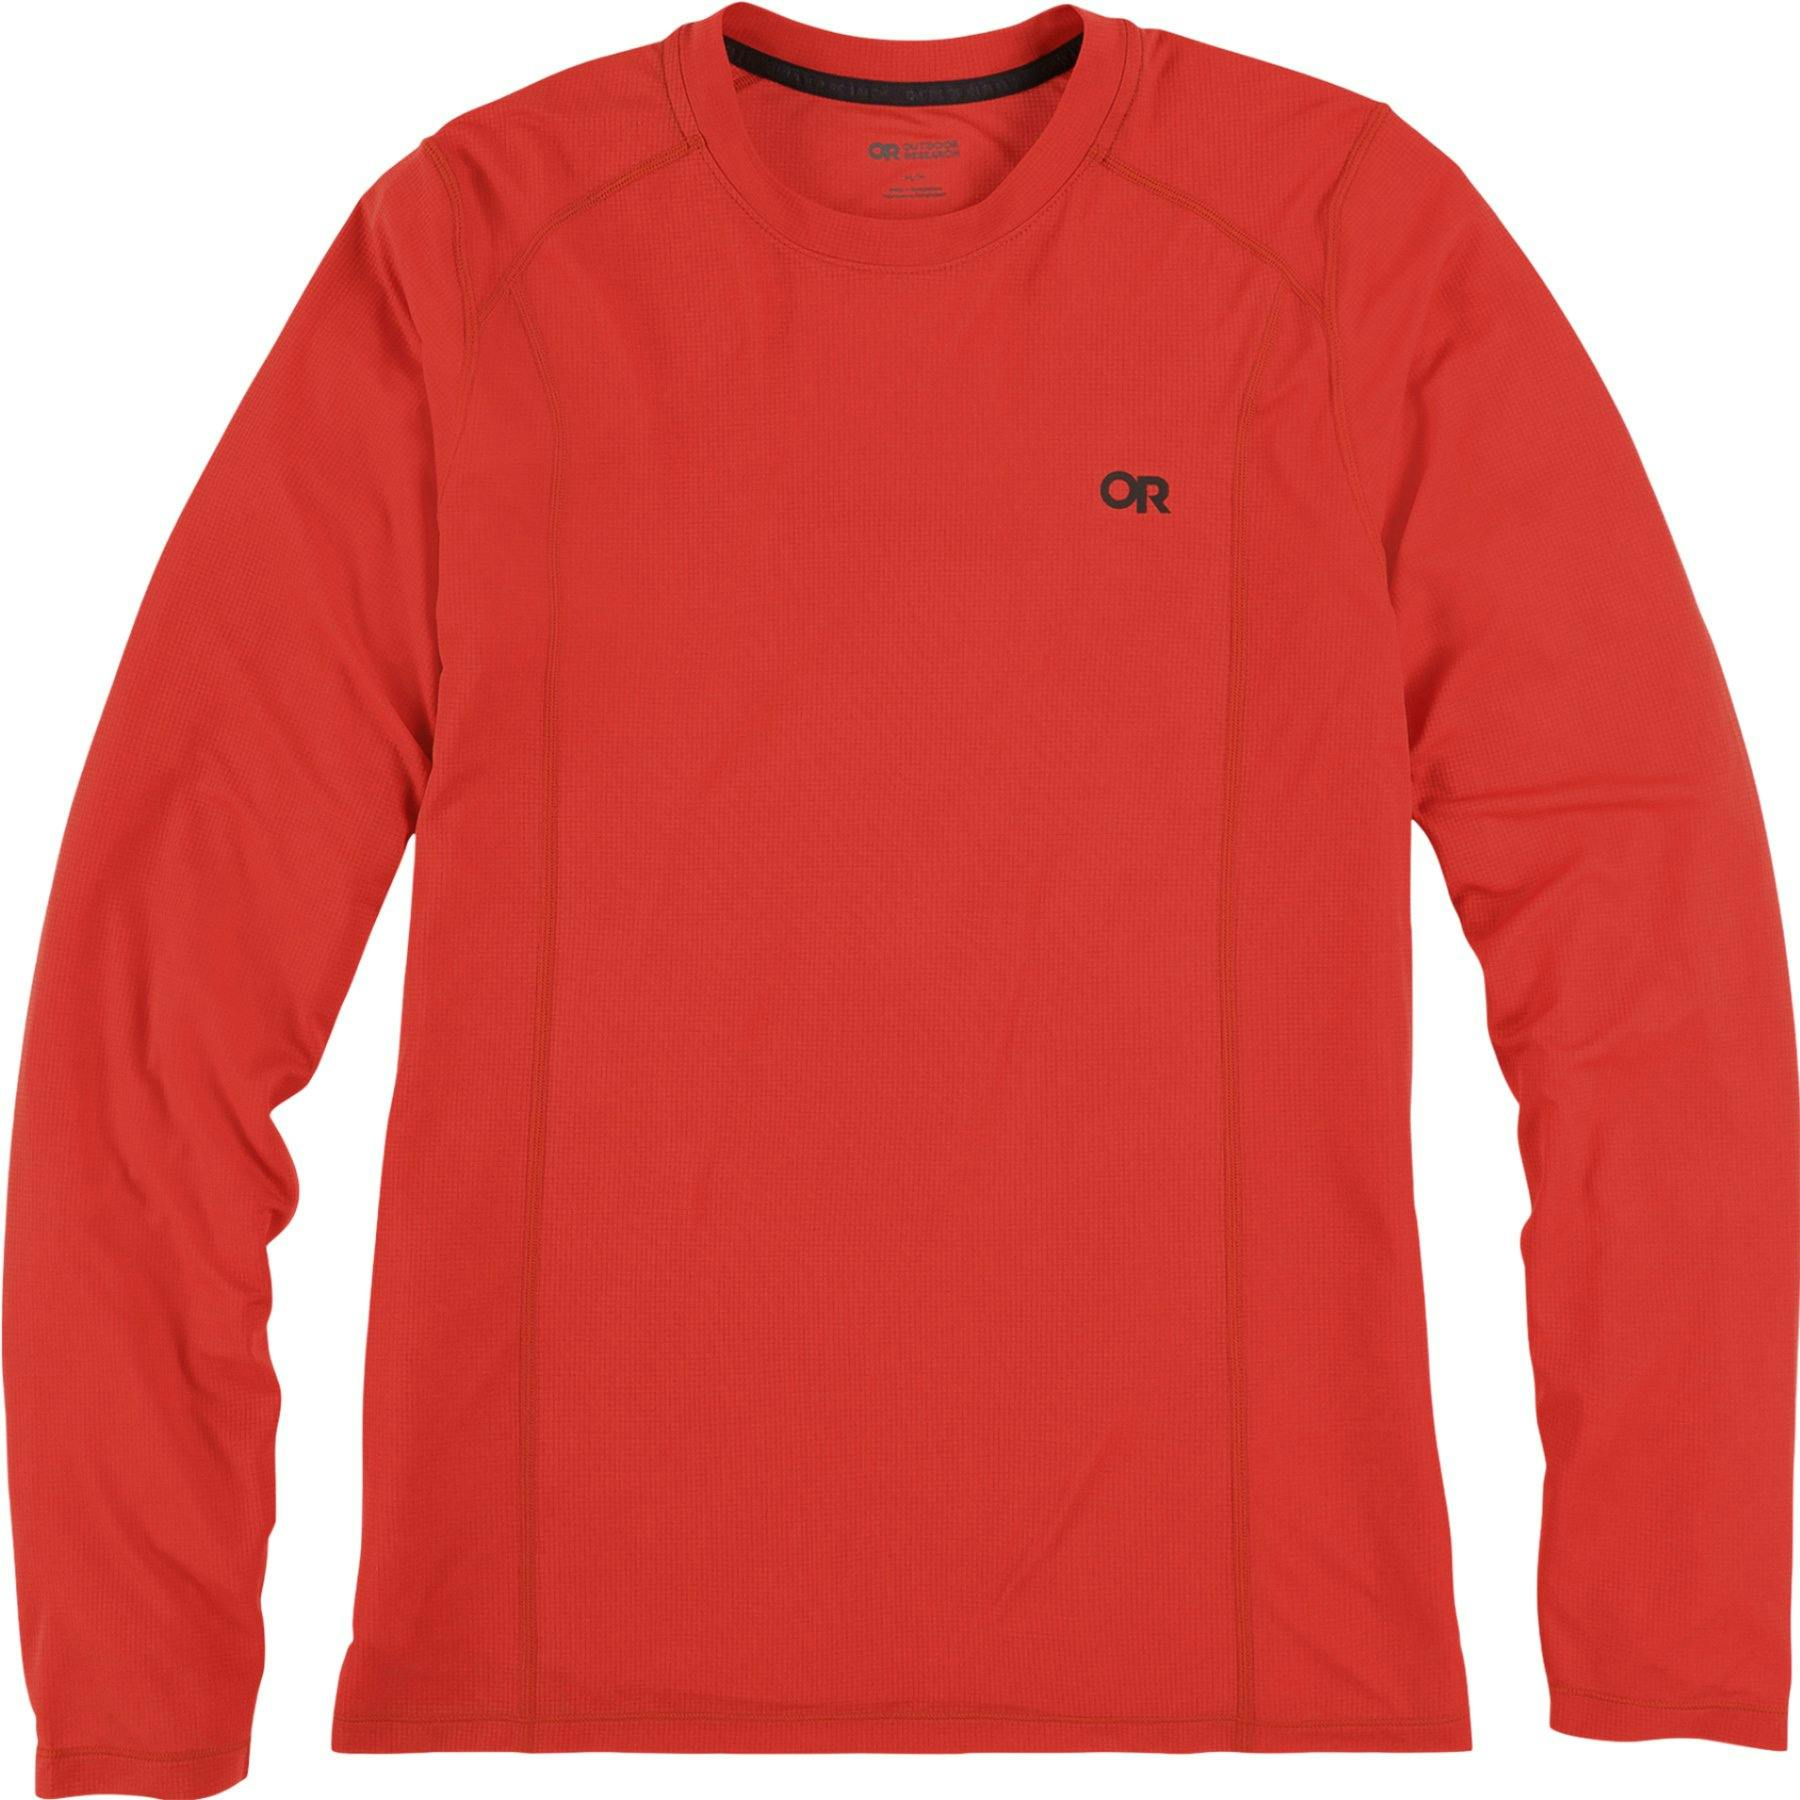 Product image for Echo L/S Tee - Men's